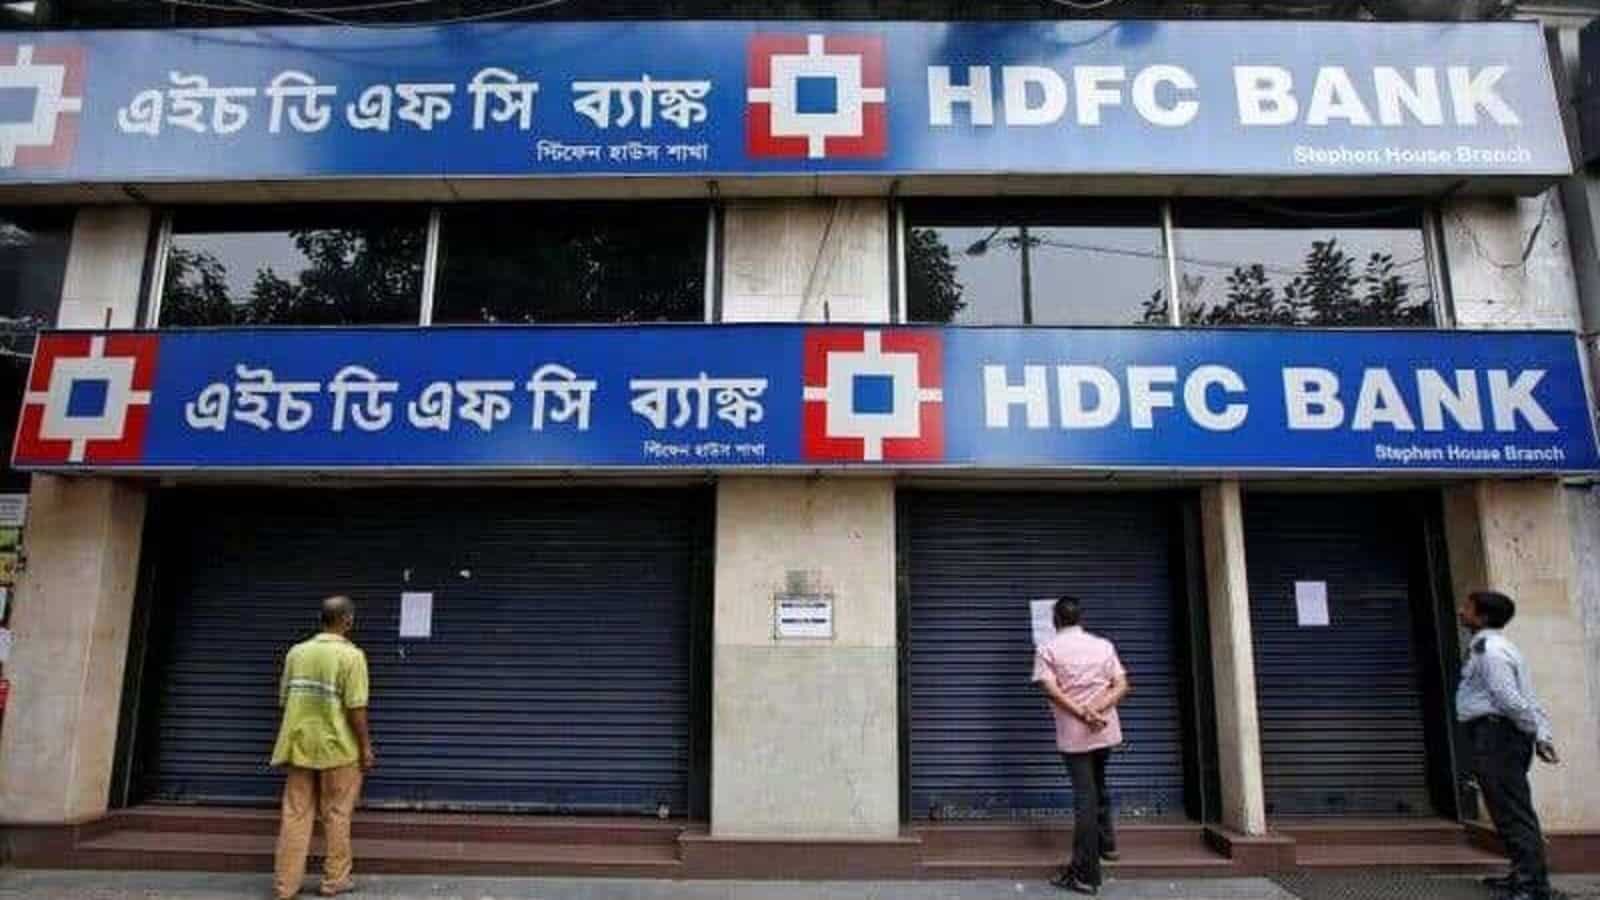 HDFC Bank issues India’s first Electronic Bank Guarantee